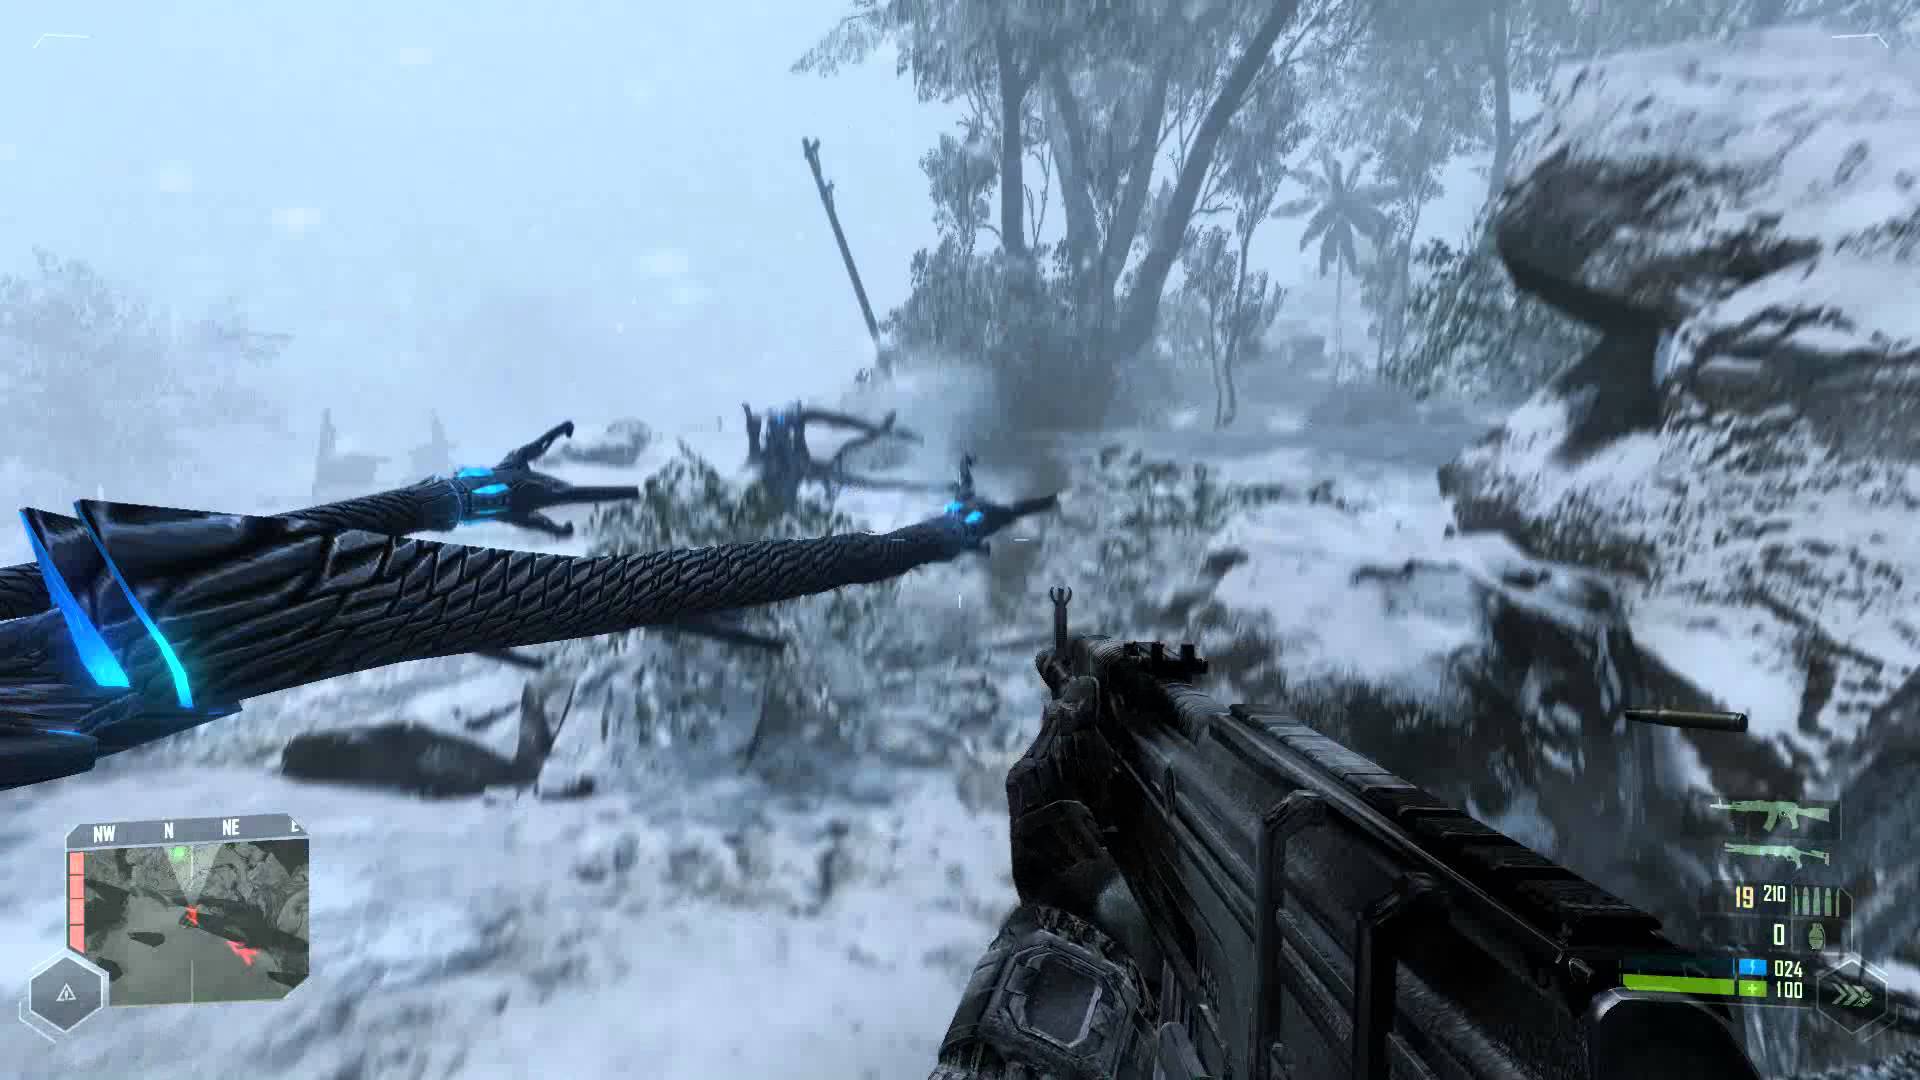 Crysis - frozen jungle 1080p max details - YouTube